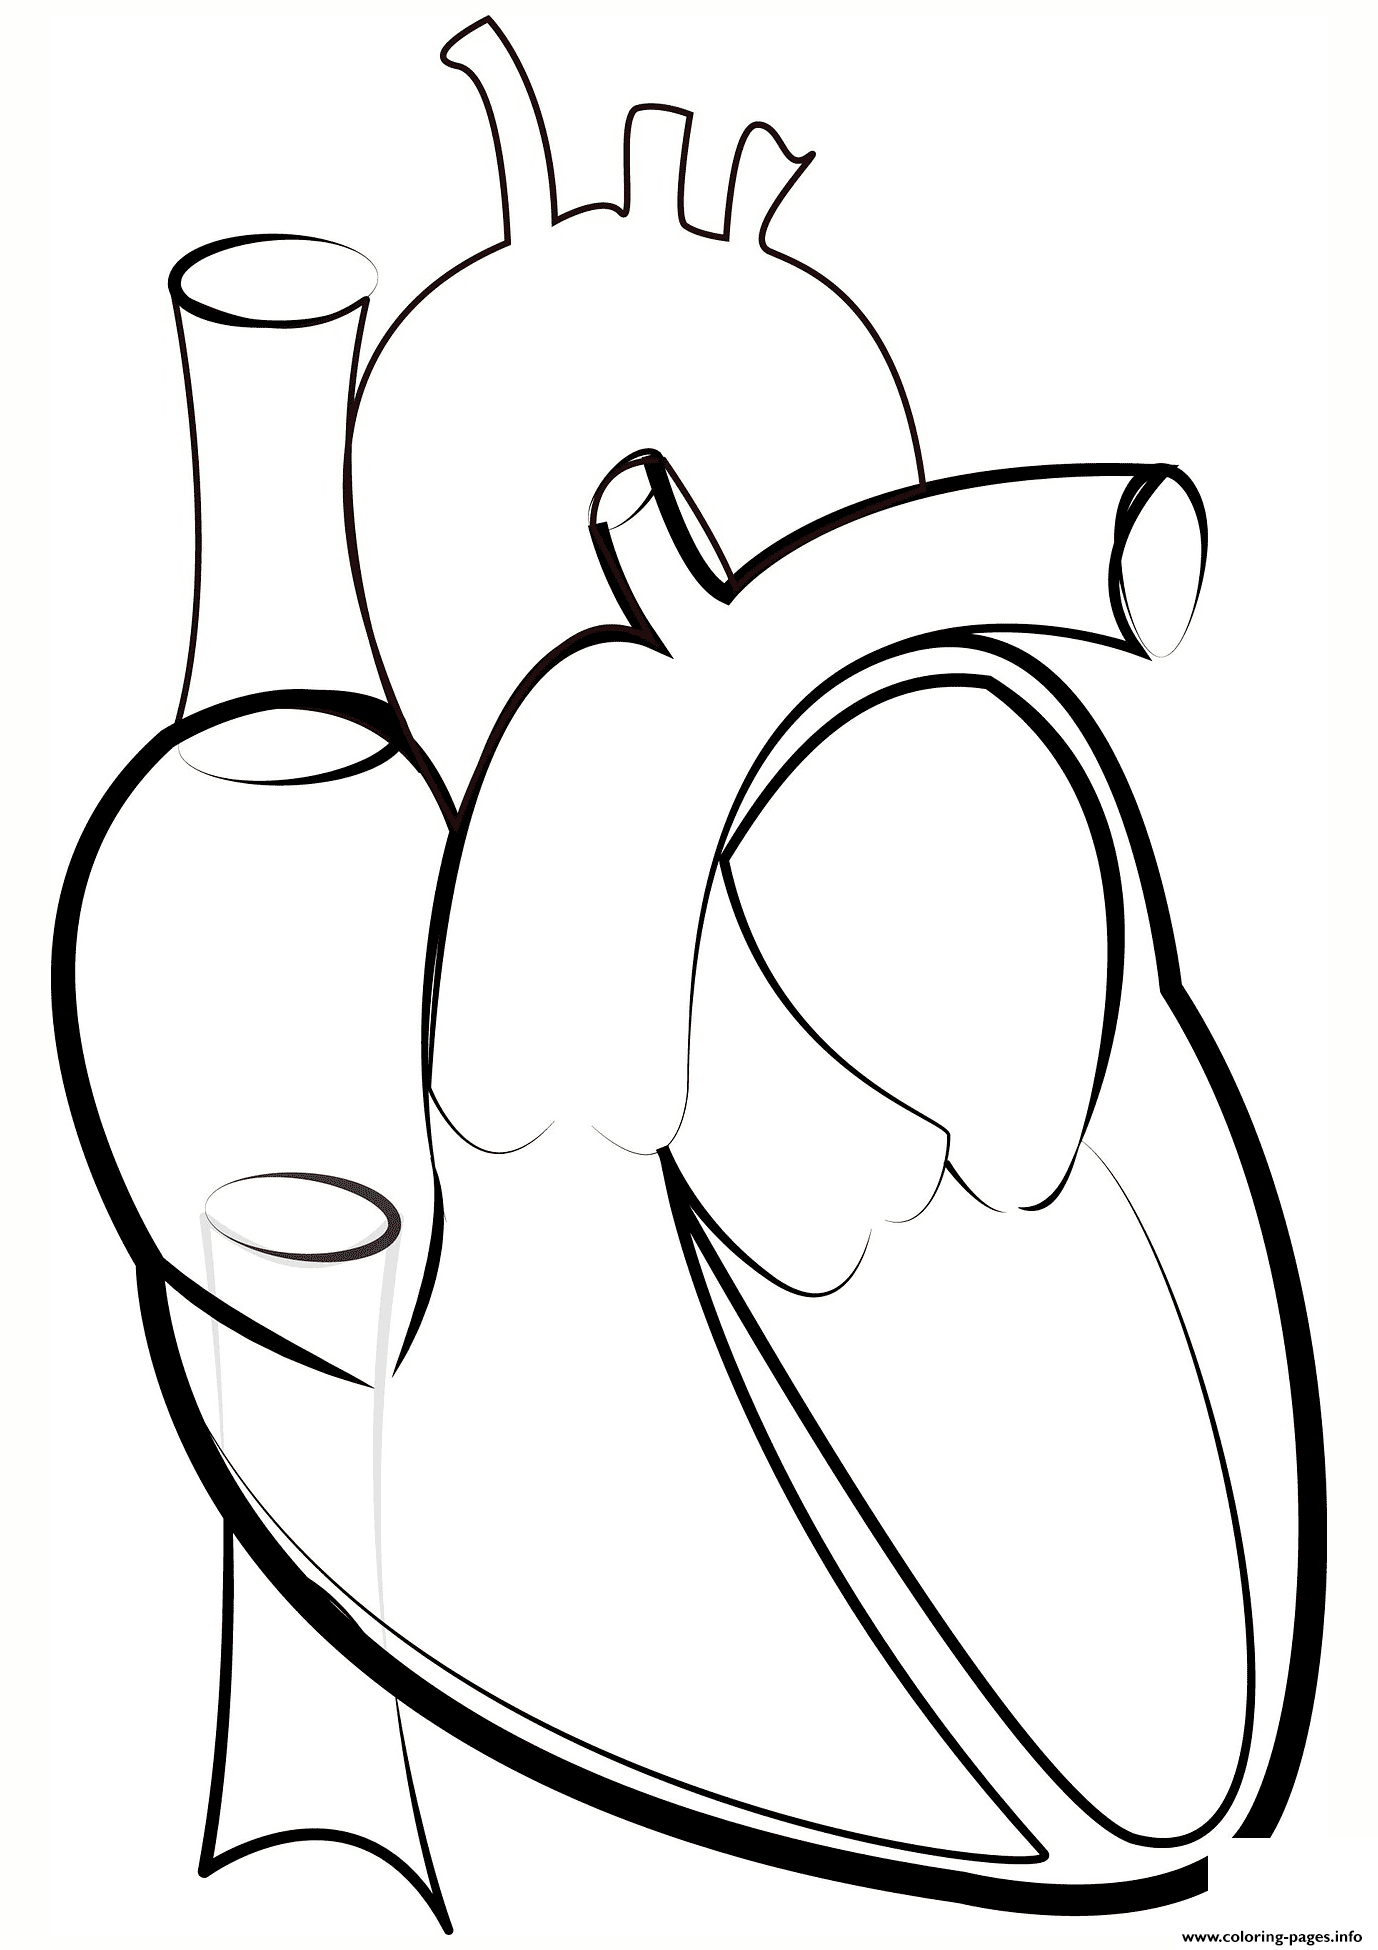 Heart Outline coloring